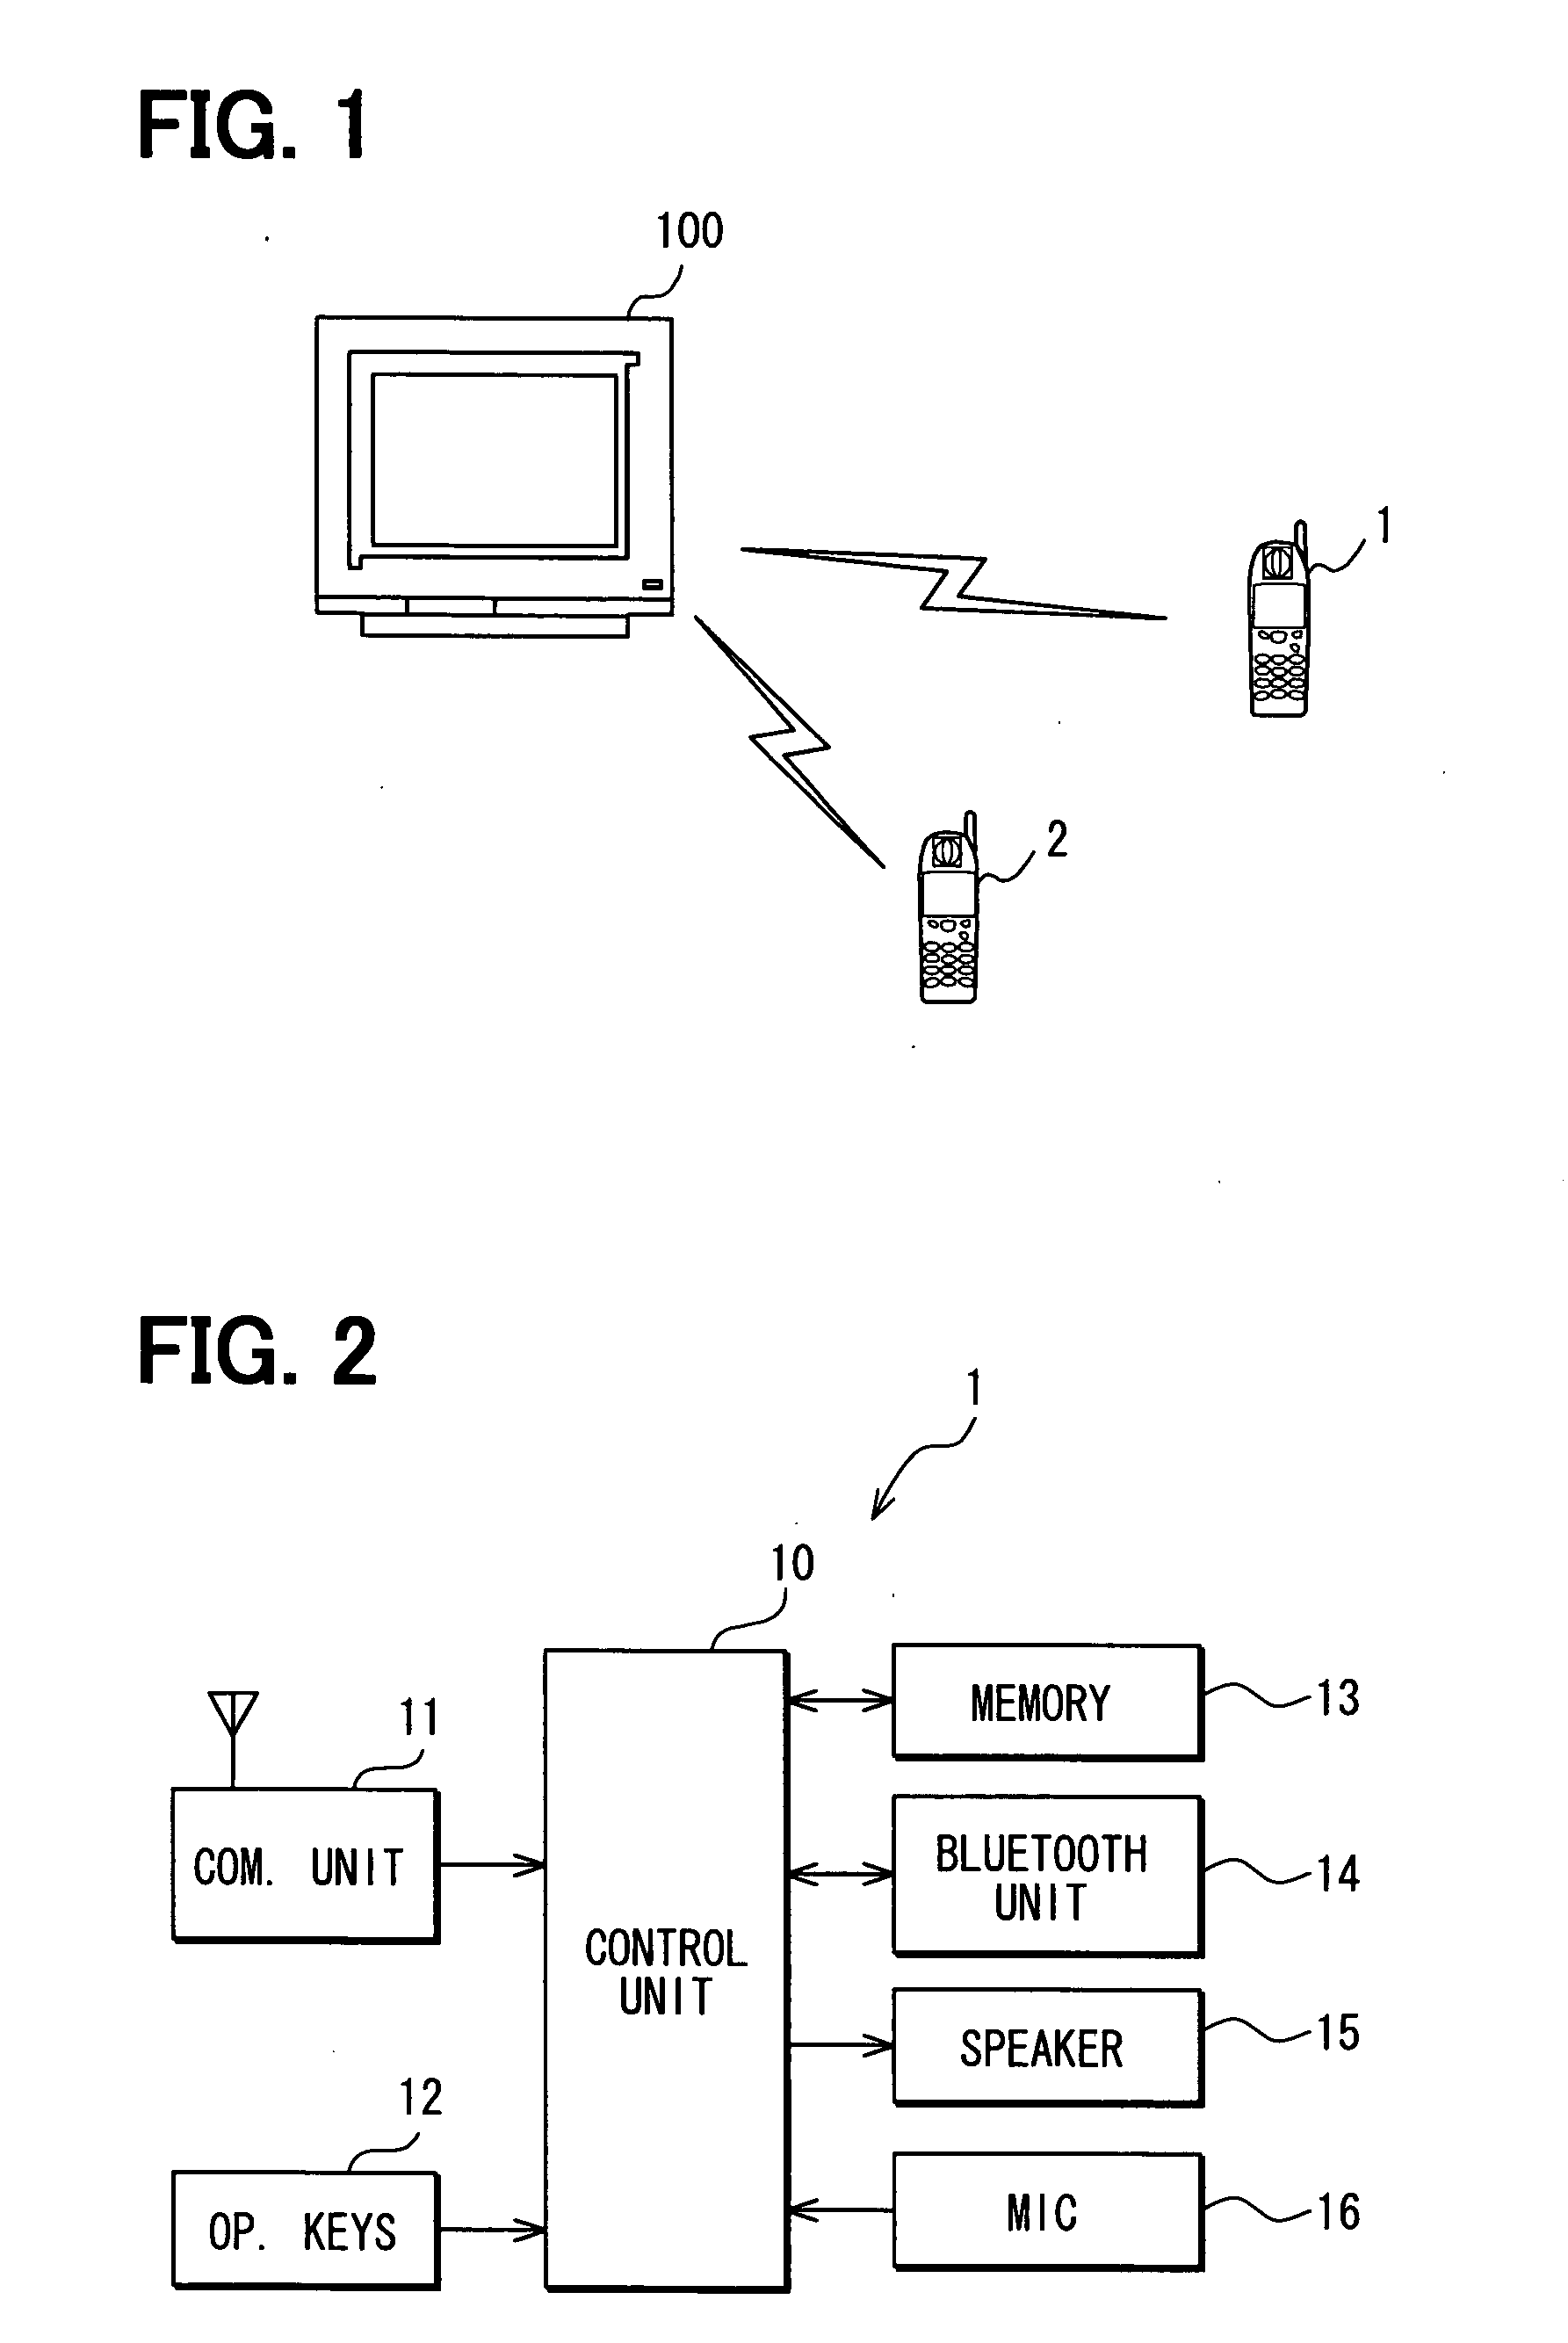 Cellular phone control apparatus, method of controlling same and hands-free call placement apparatus